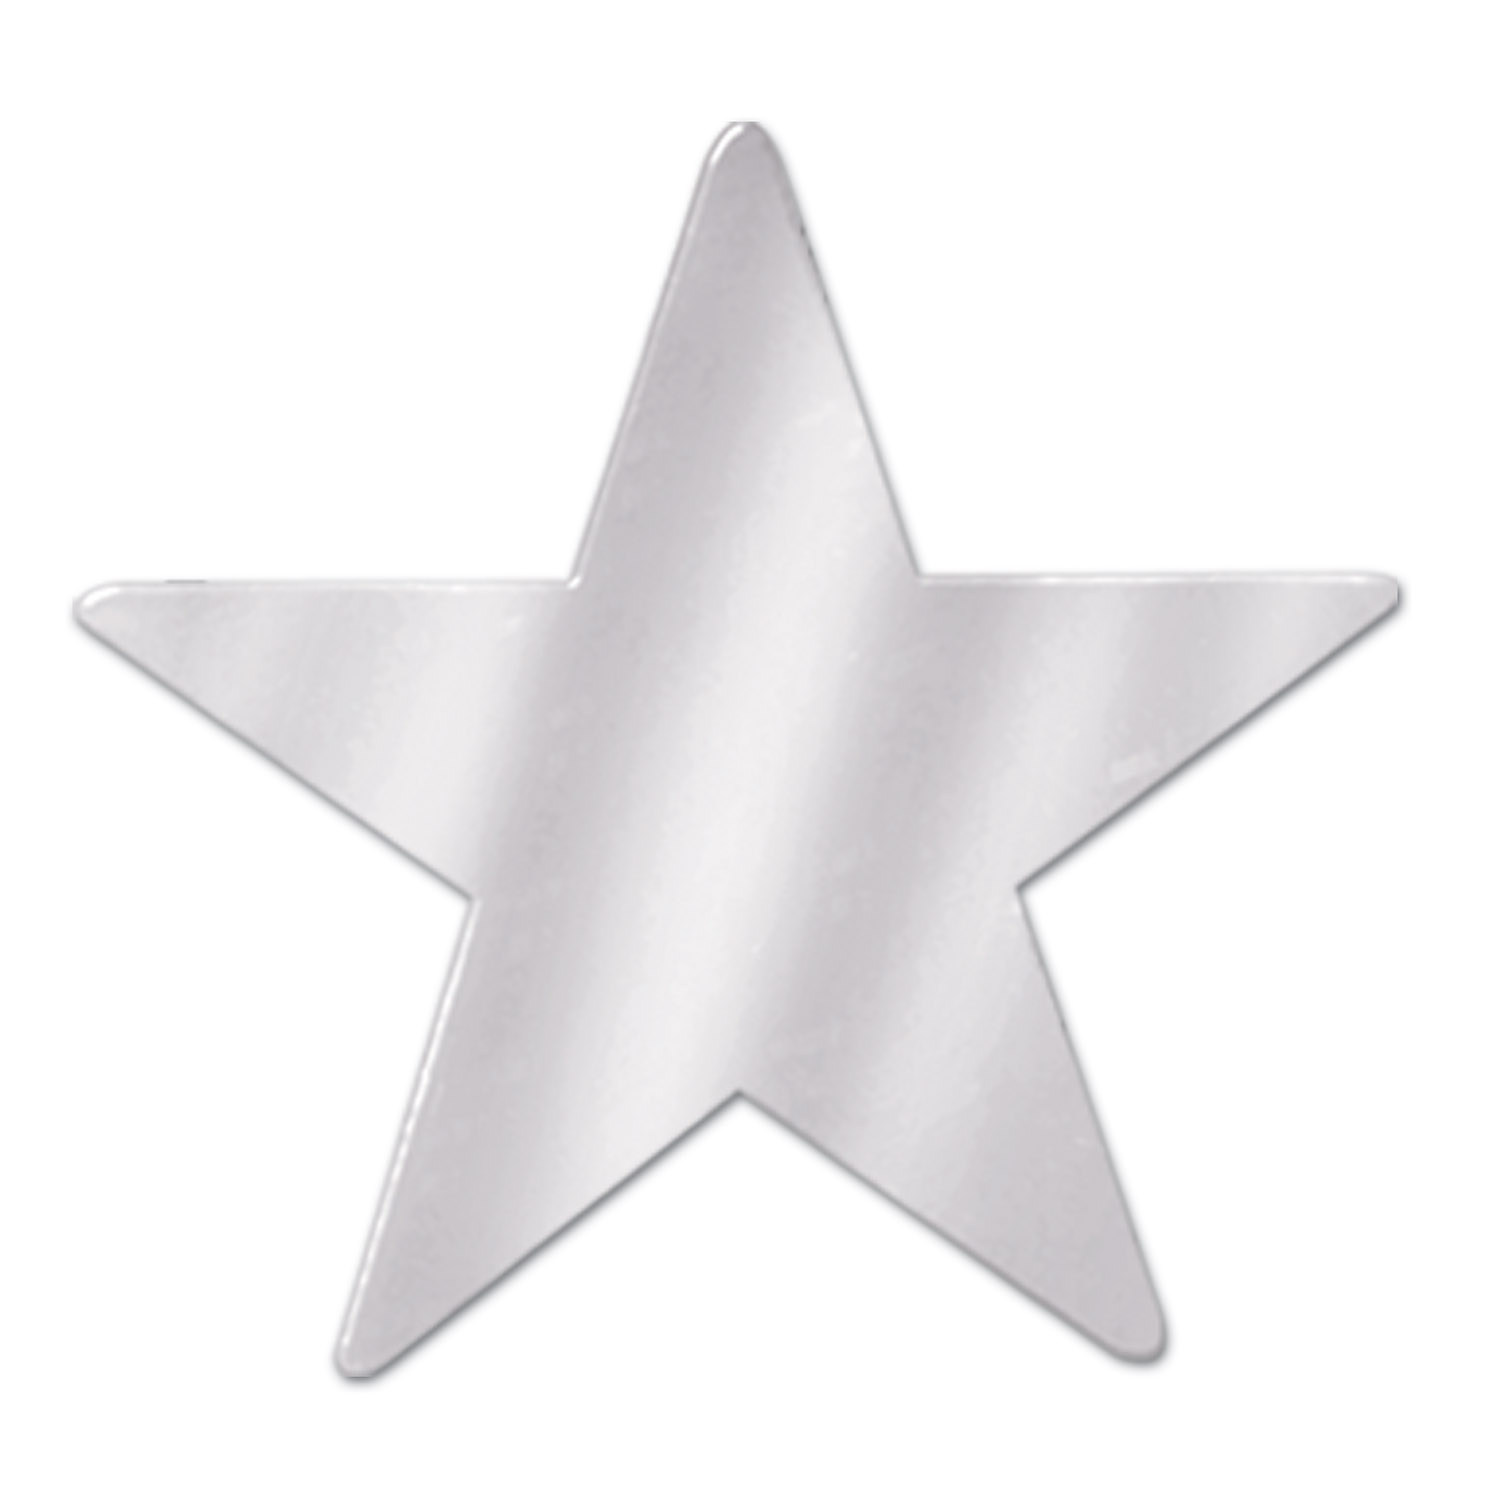 Silver shiny metallic star cutout printed on card stock Material 